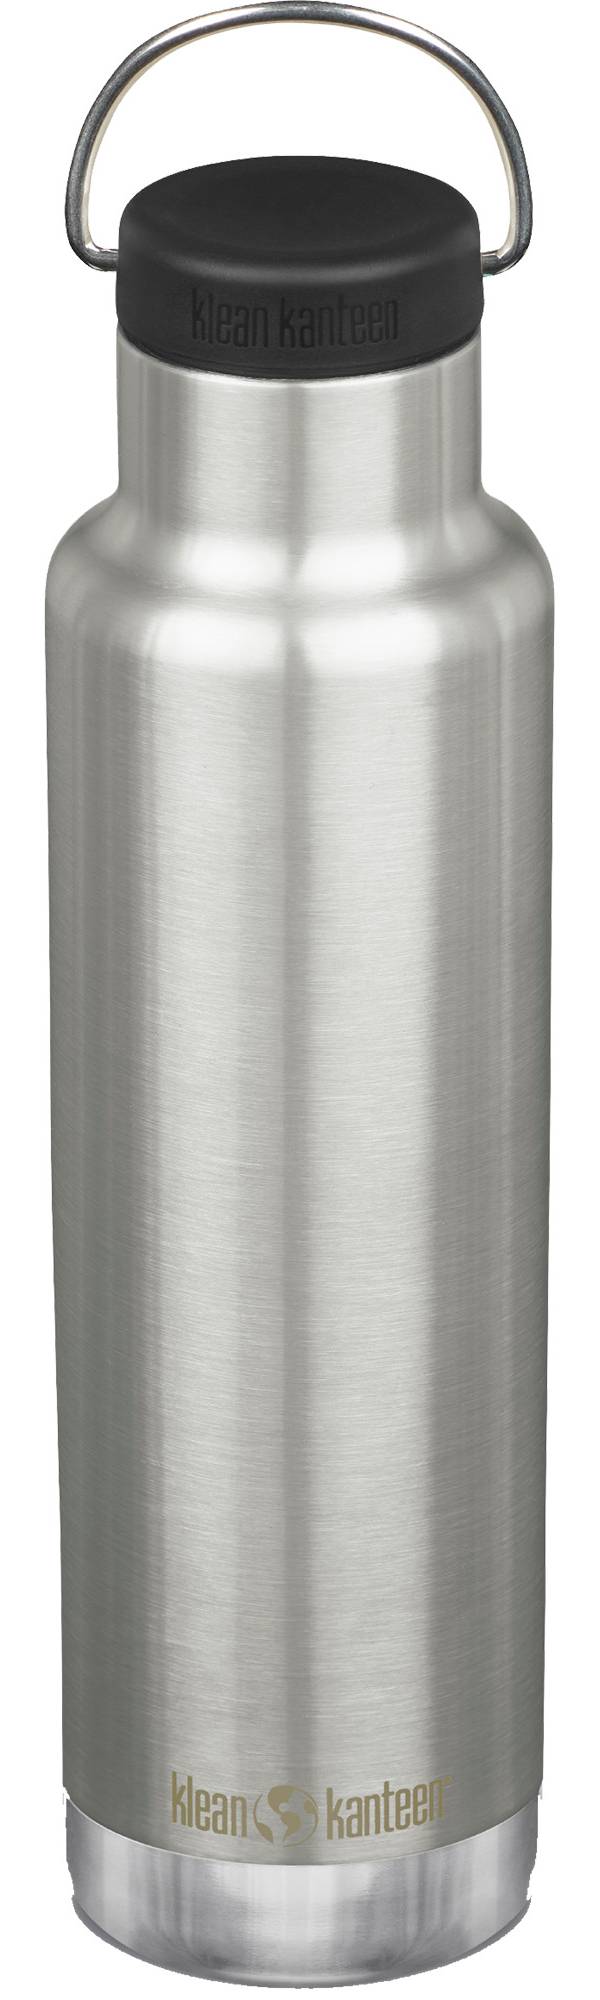 Klean Kanteen 20 oz. Classic Insulated Water Bottle with Loop Cap product image